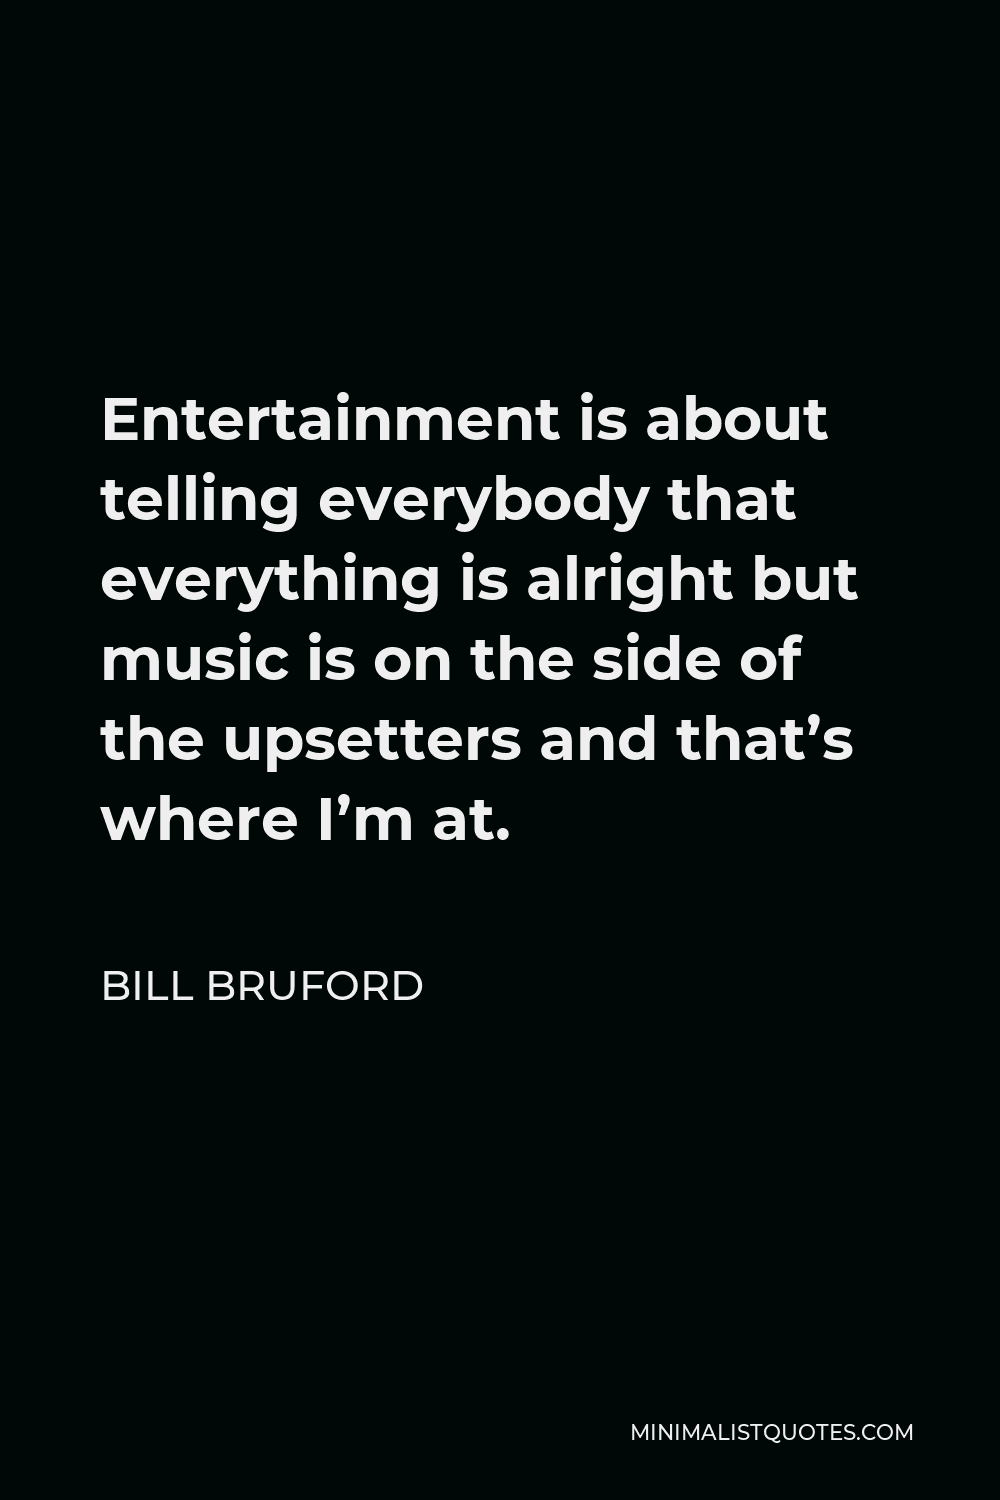 Bill Bruford Quote - Entertainment is about telling everybody that everything is alright but music is on the side of the upsetters and that’s where I’m at.